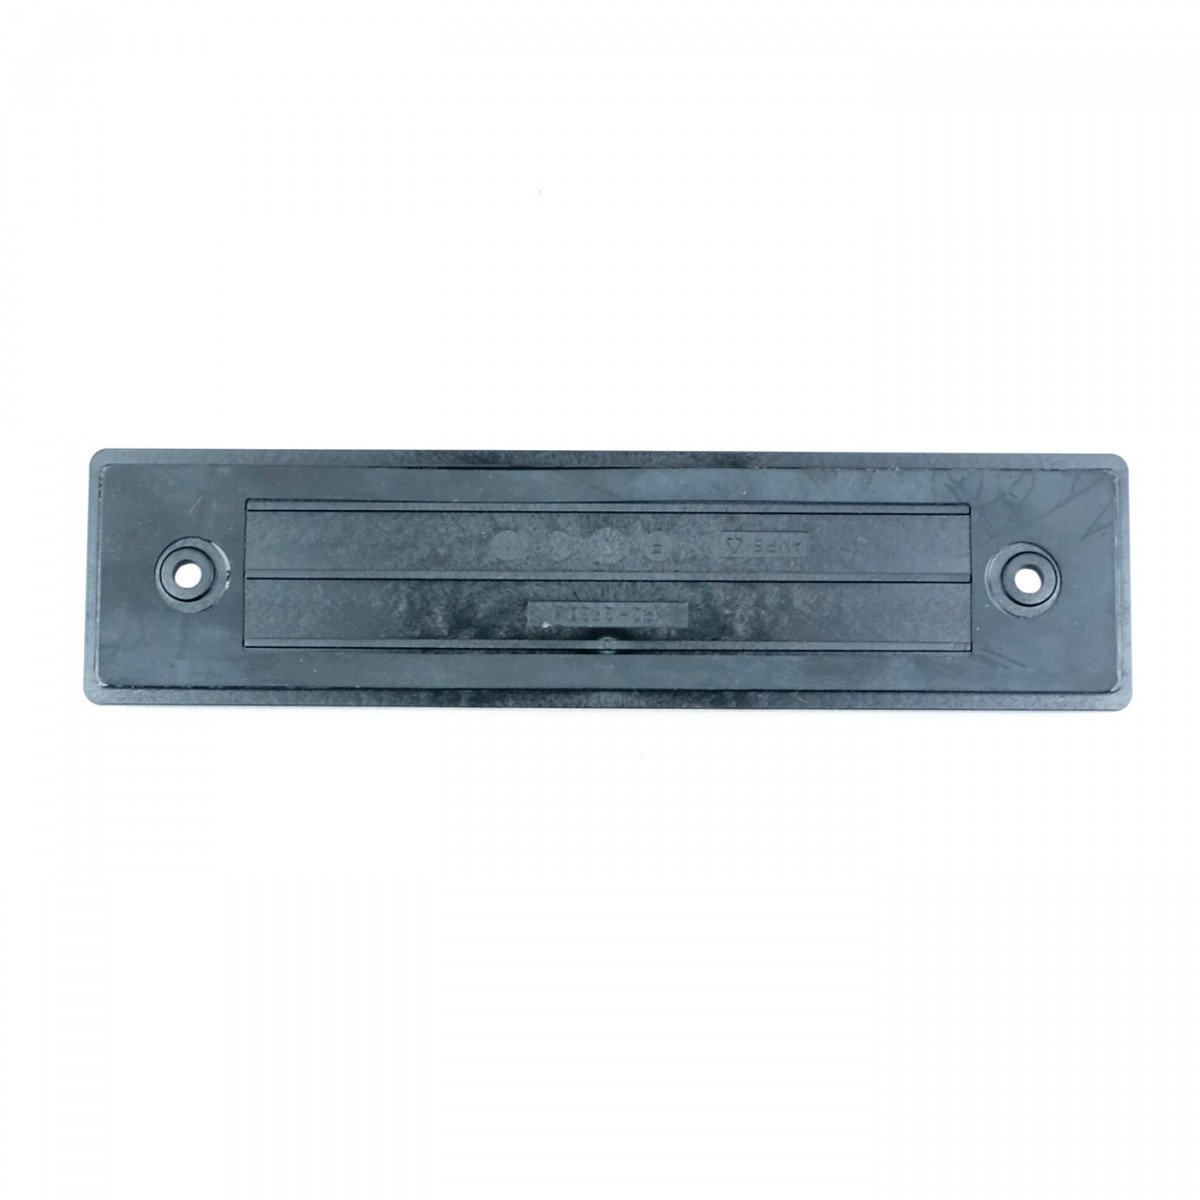 SEPURA AMPS cover plate for rear of control panel SCC1 / SCC3 300-00784